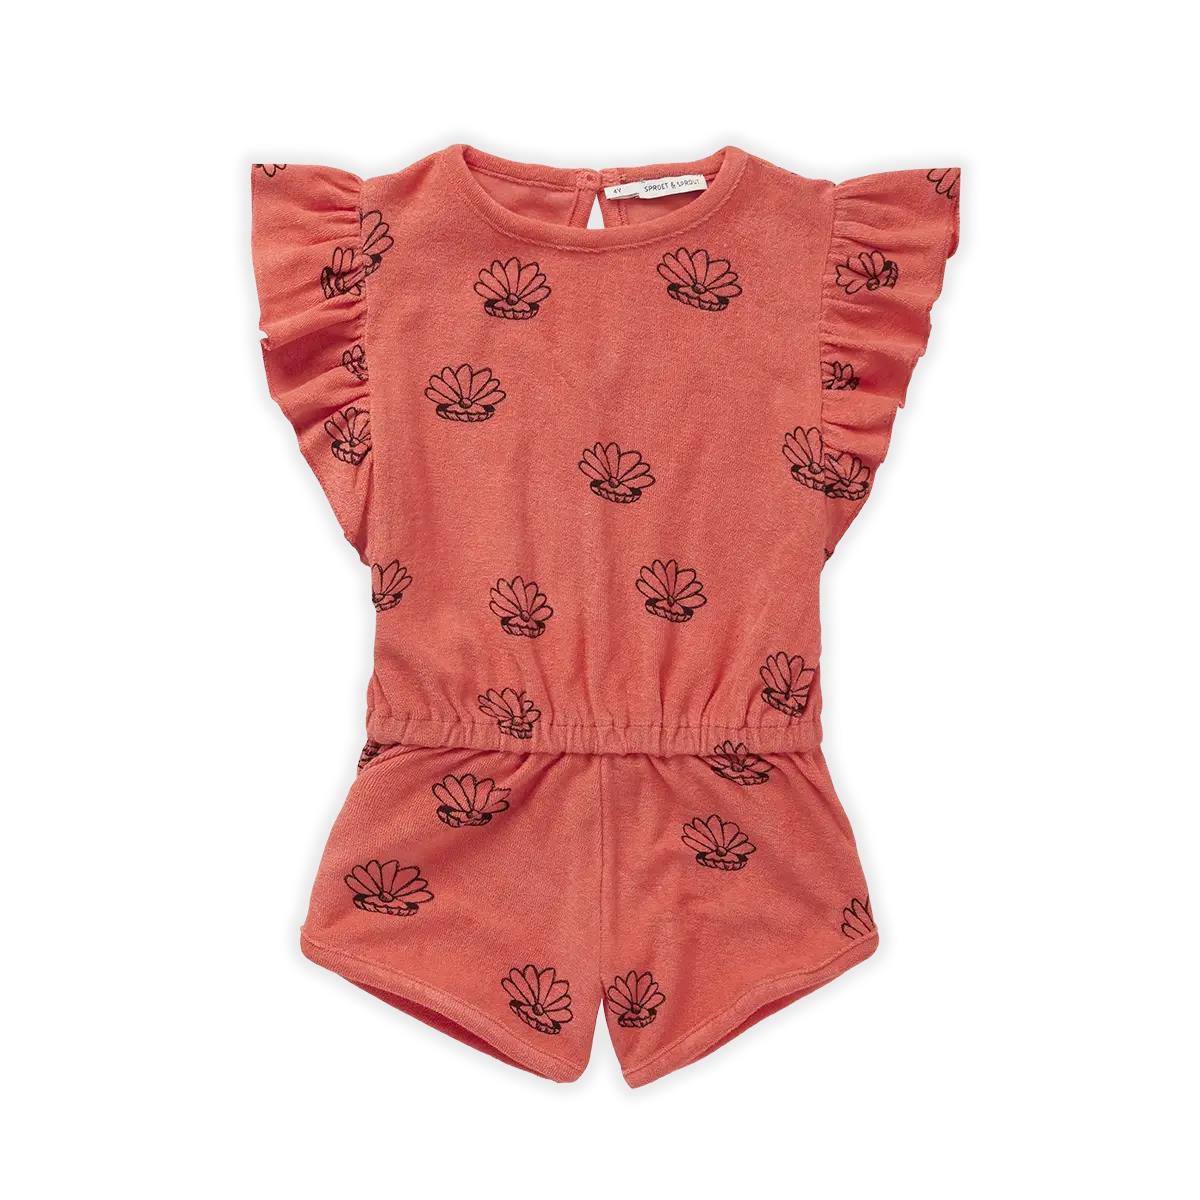 SPROET & SPROUT - Girls jumpsuit shell print